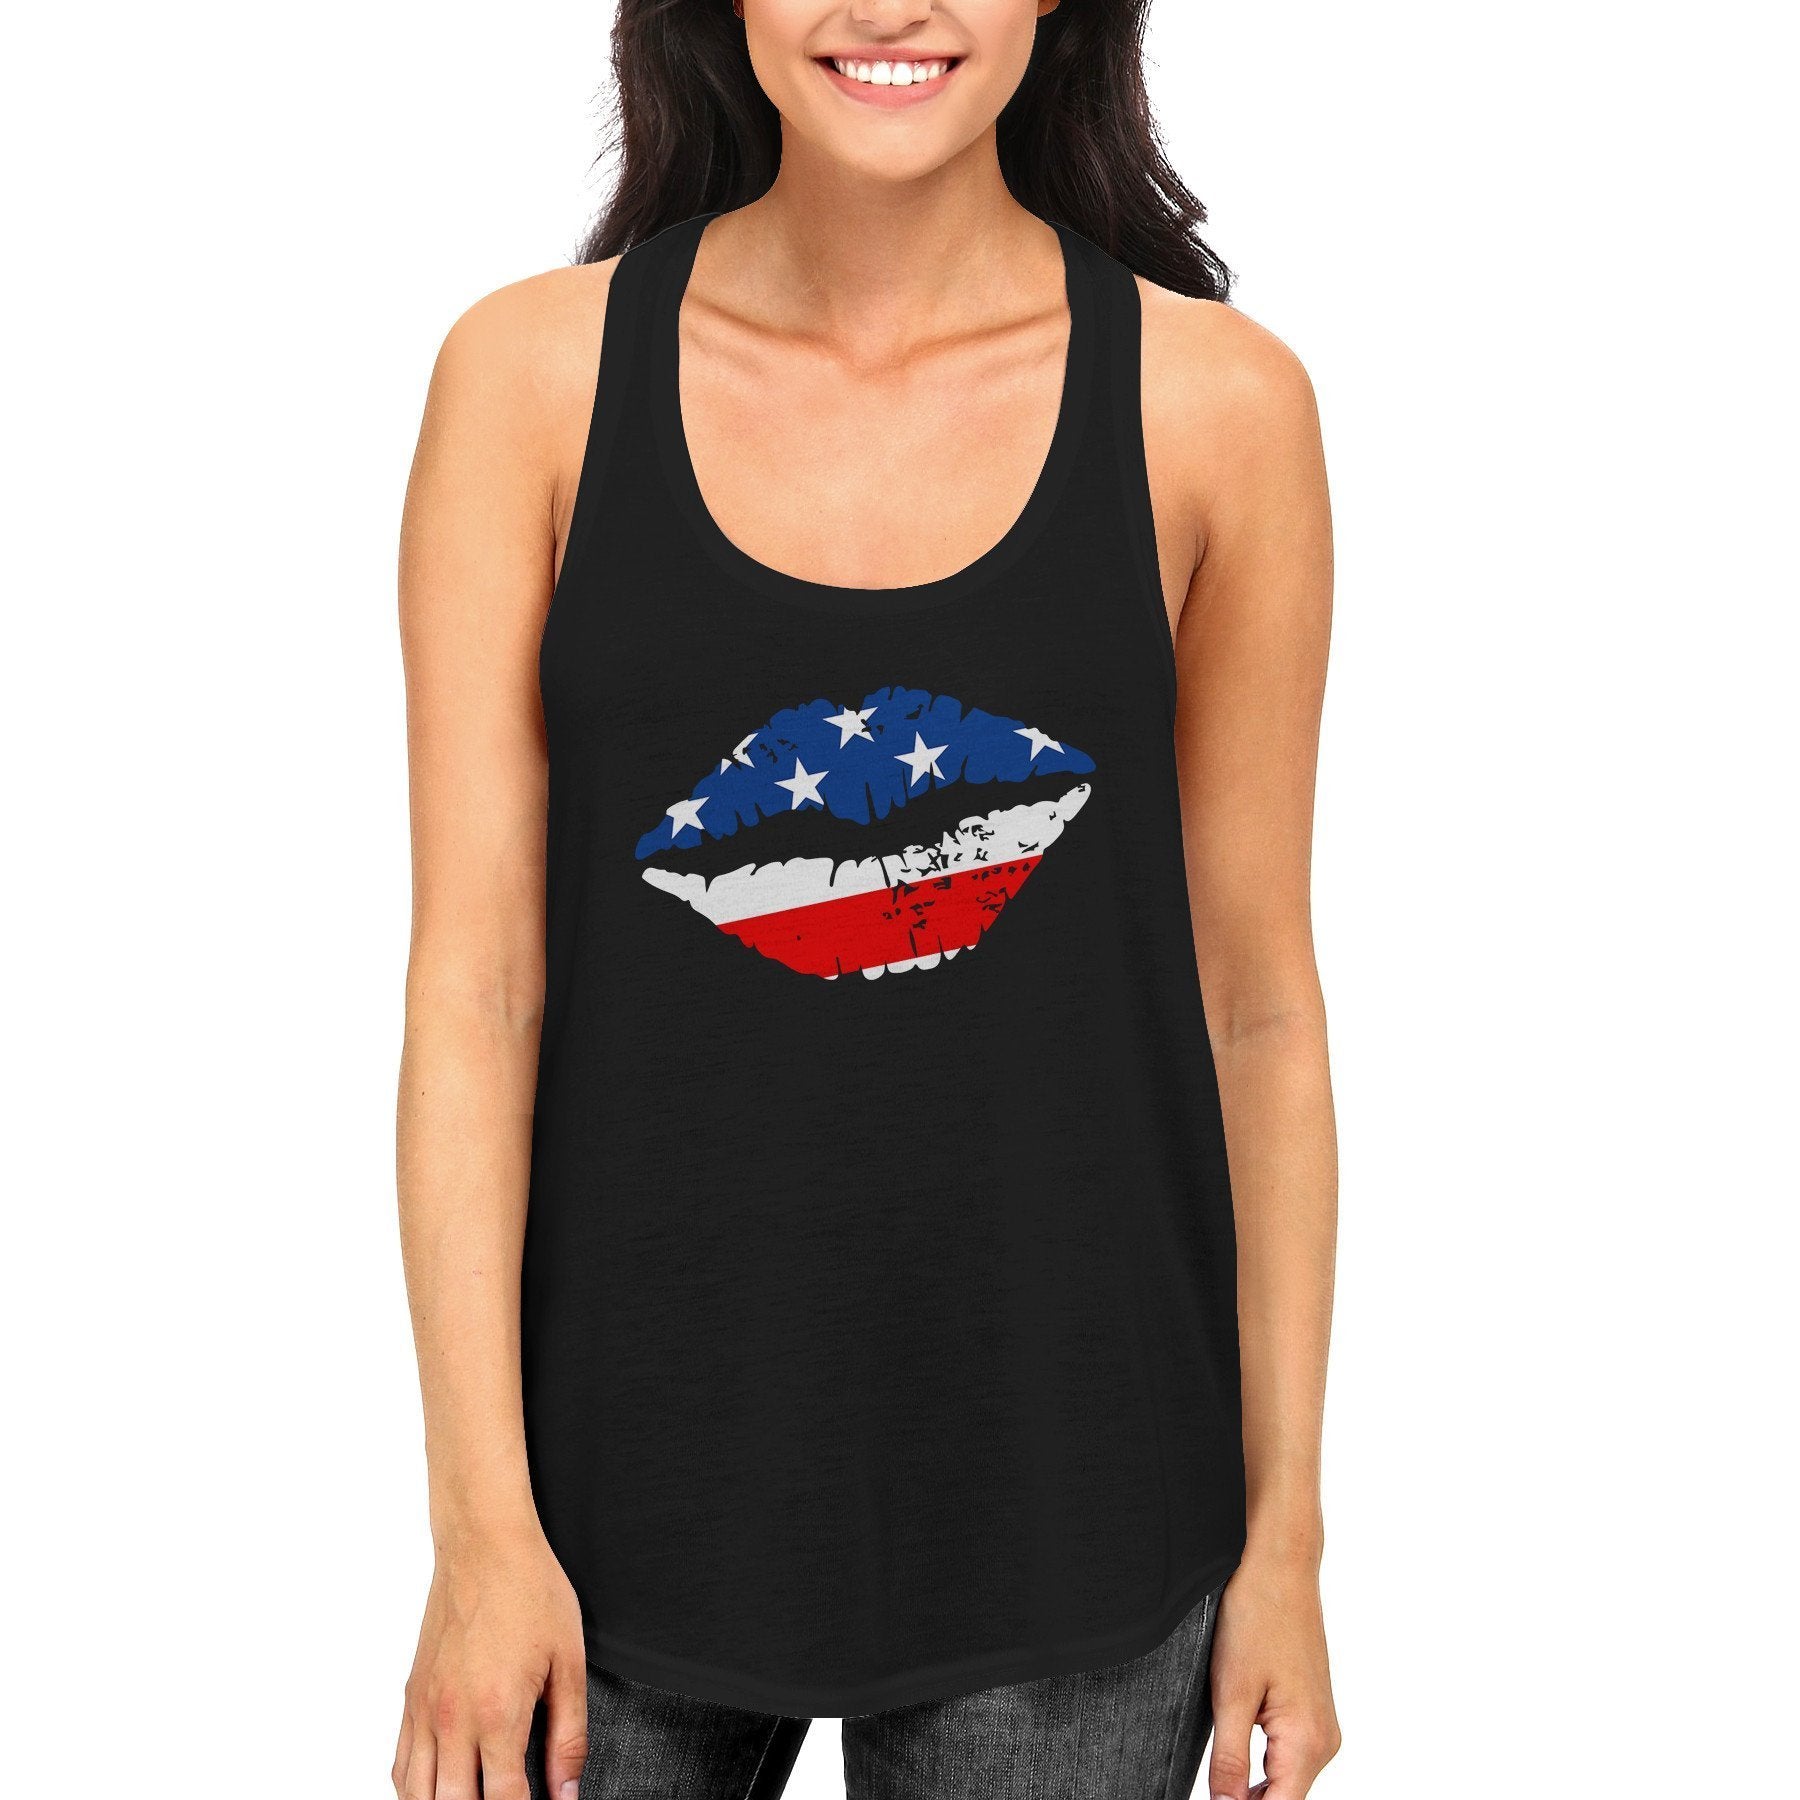 July 4th American Flag Lip Tank Top for Women Cute Racerback Tank-Gains Everyday